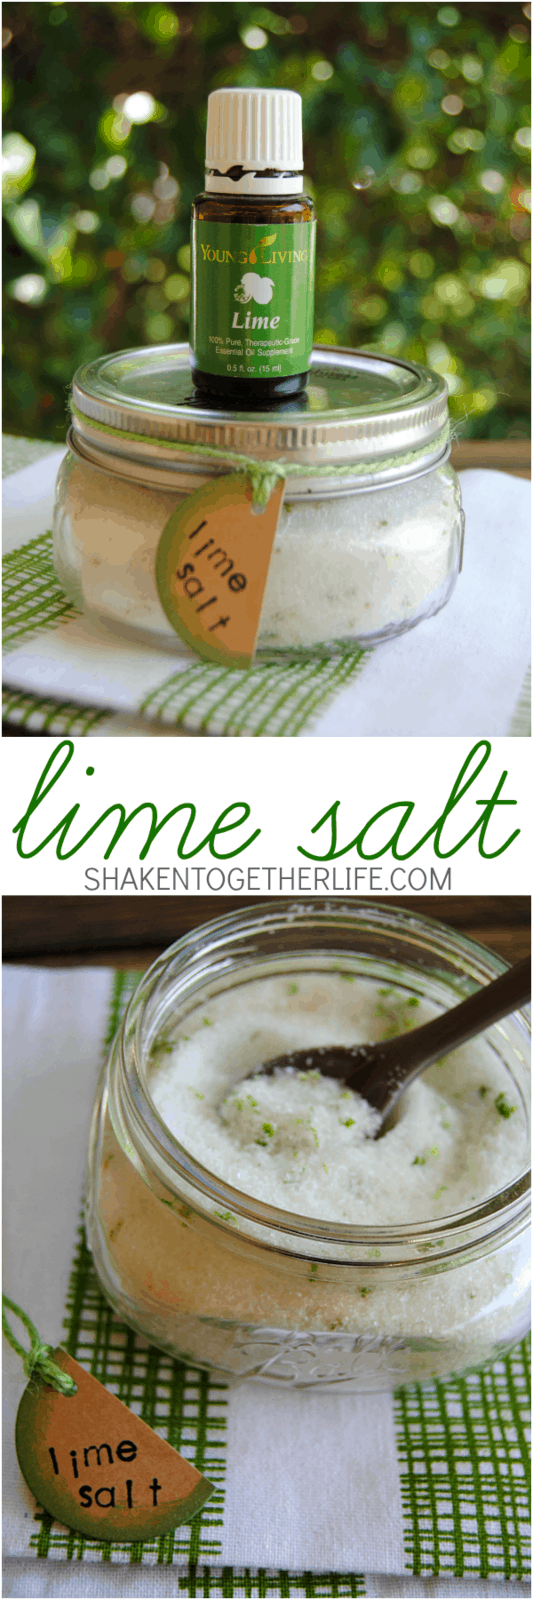 Make your own lime salt with just 3 ingredients! Perfect for margaritas, homemade tortilla chips, on a baked potato, sprinkled on roasted vegetables and more!